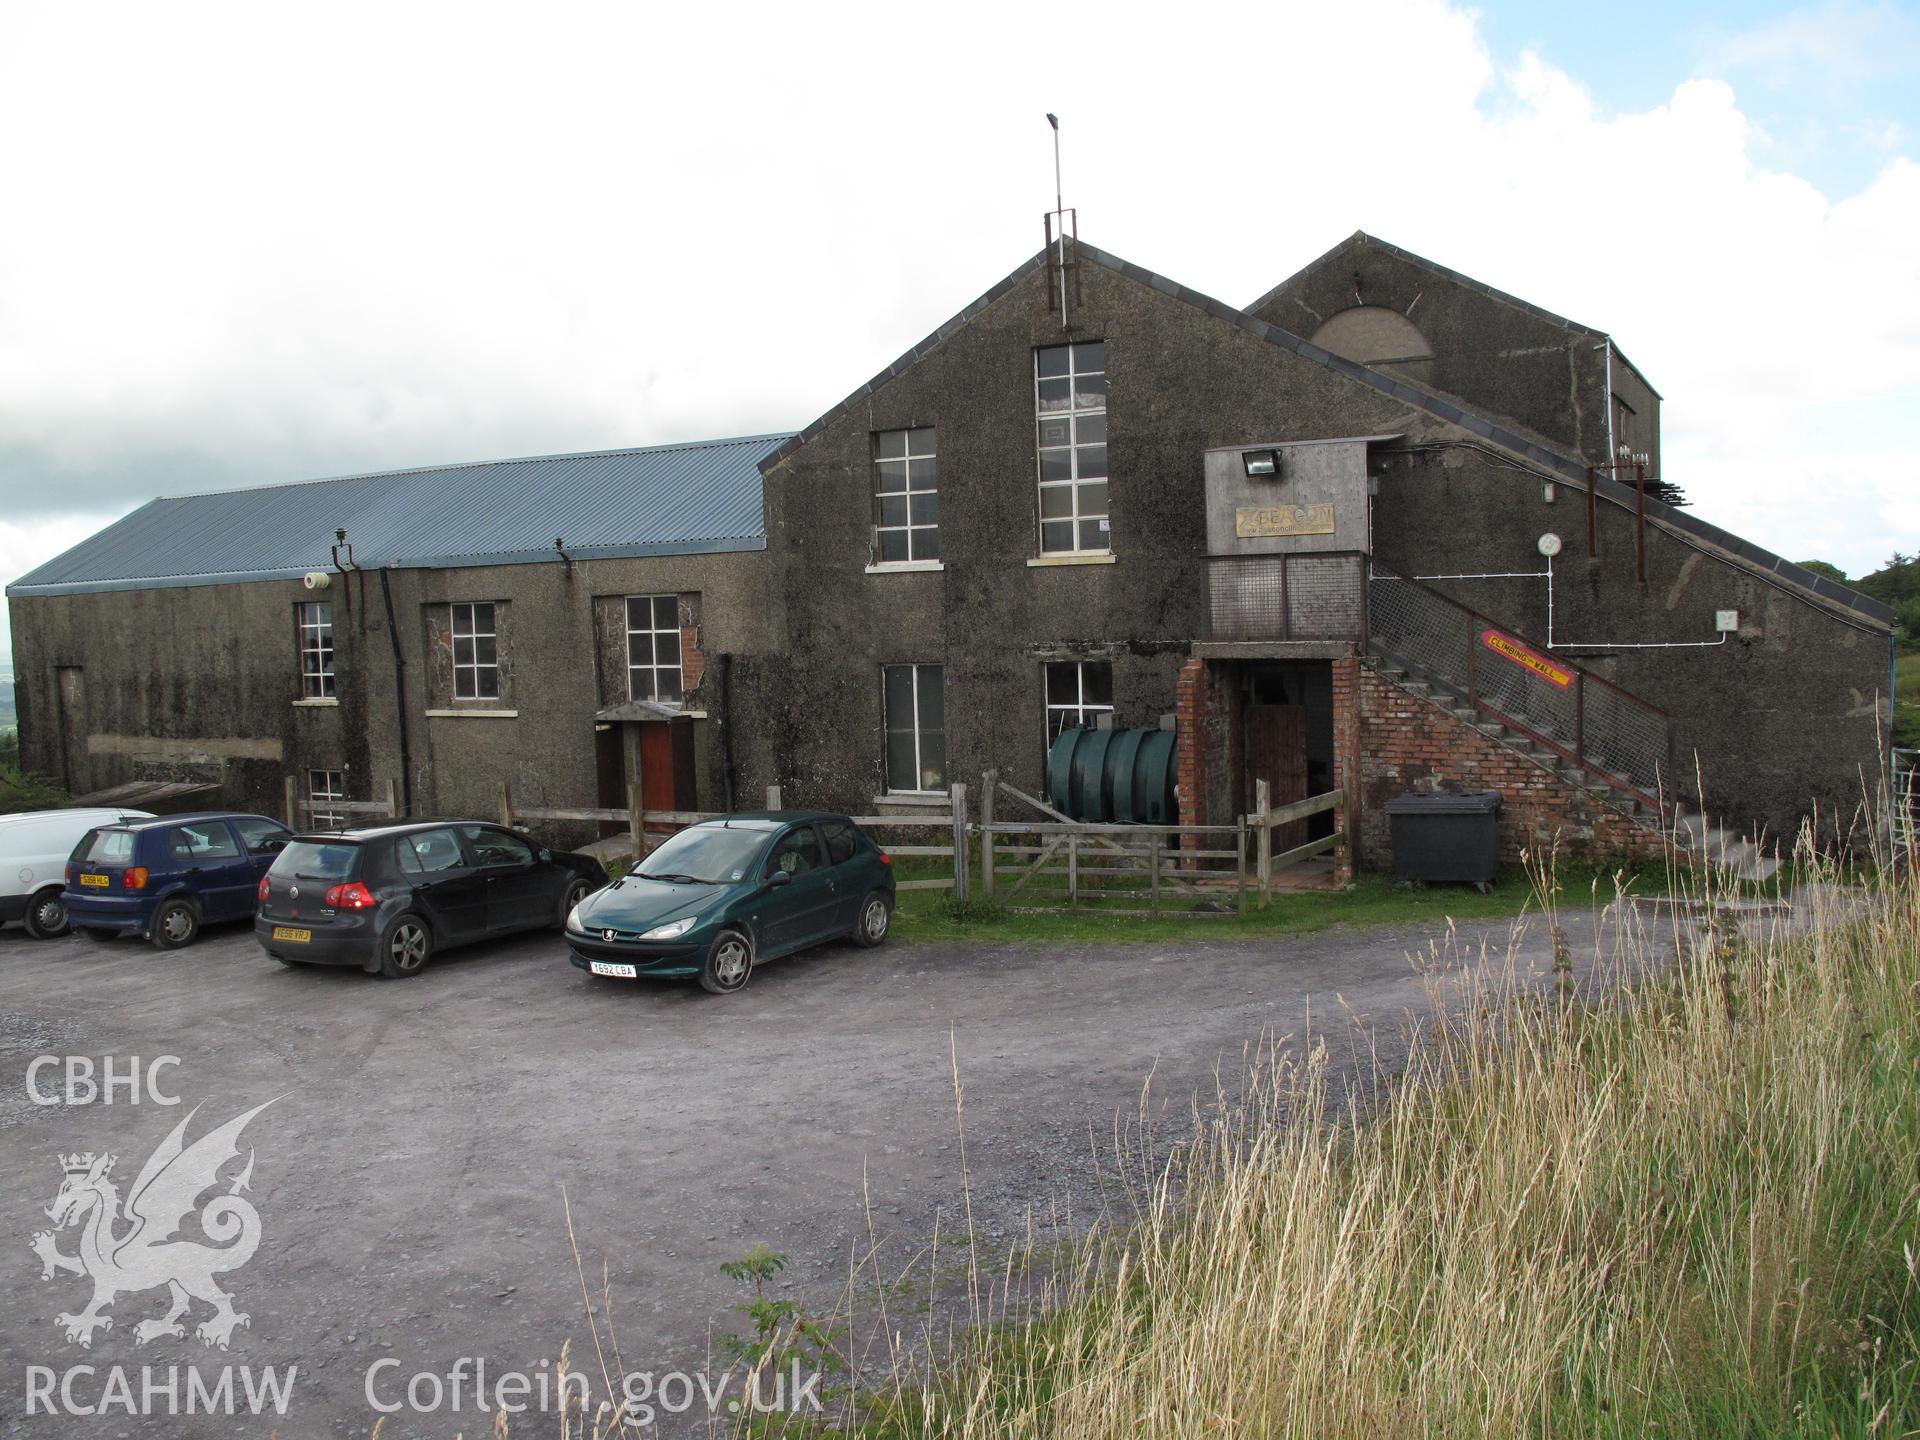 Waunfawr Radio Transmitting Station from the southeast, taken by Brian Malaws on 06 August 2009.